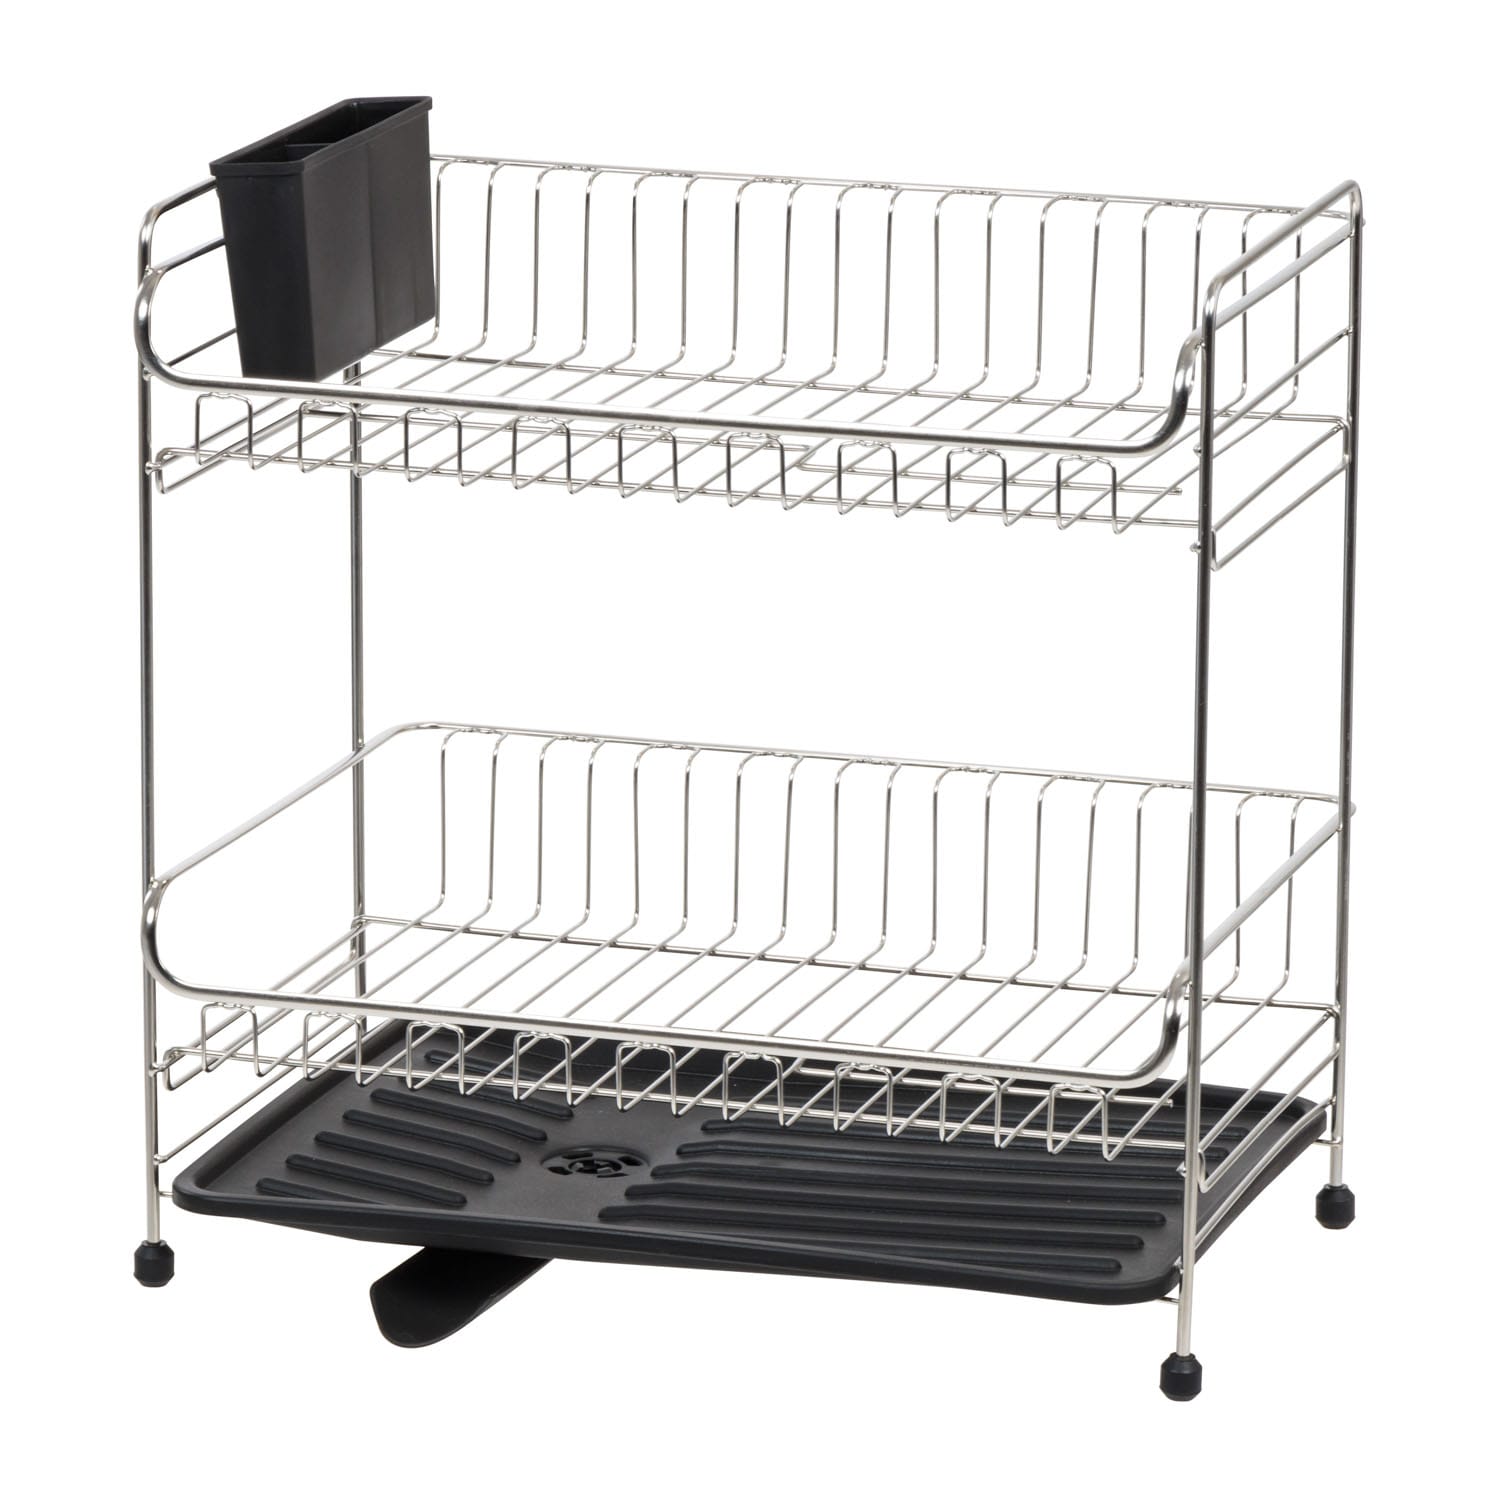  Kitchen Details Sink Dish Drainer Drying Rack, Dimensions:  19.9 x 8 x 5, Space Saving, Countertop